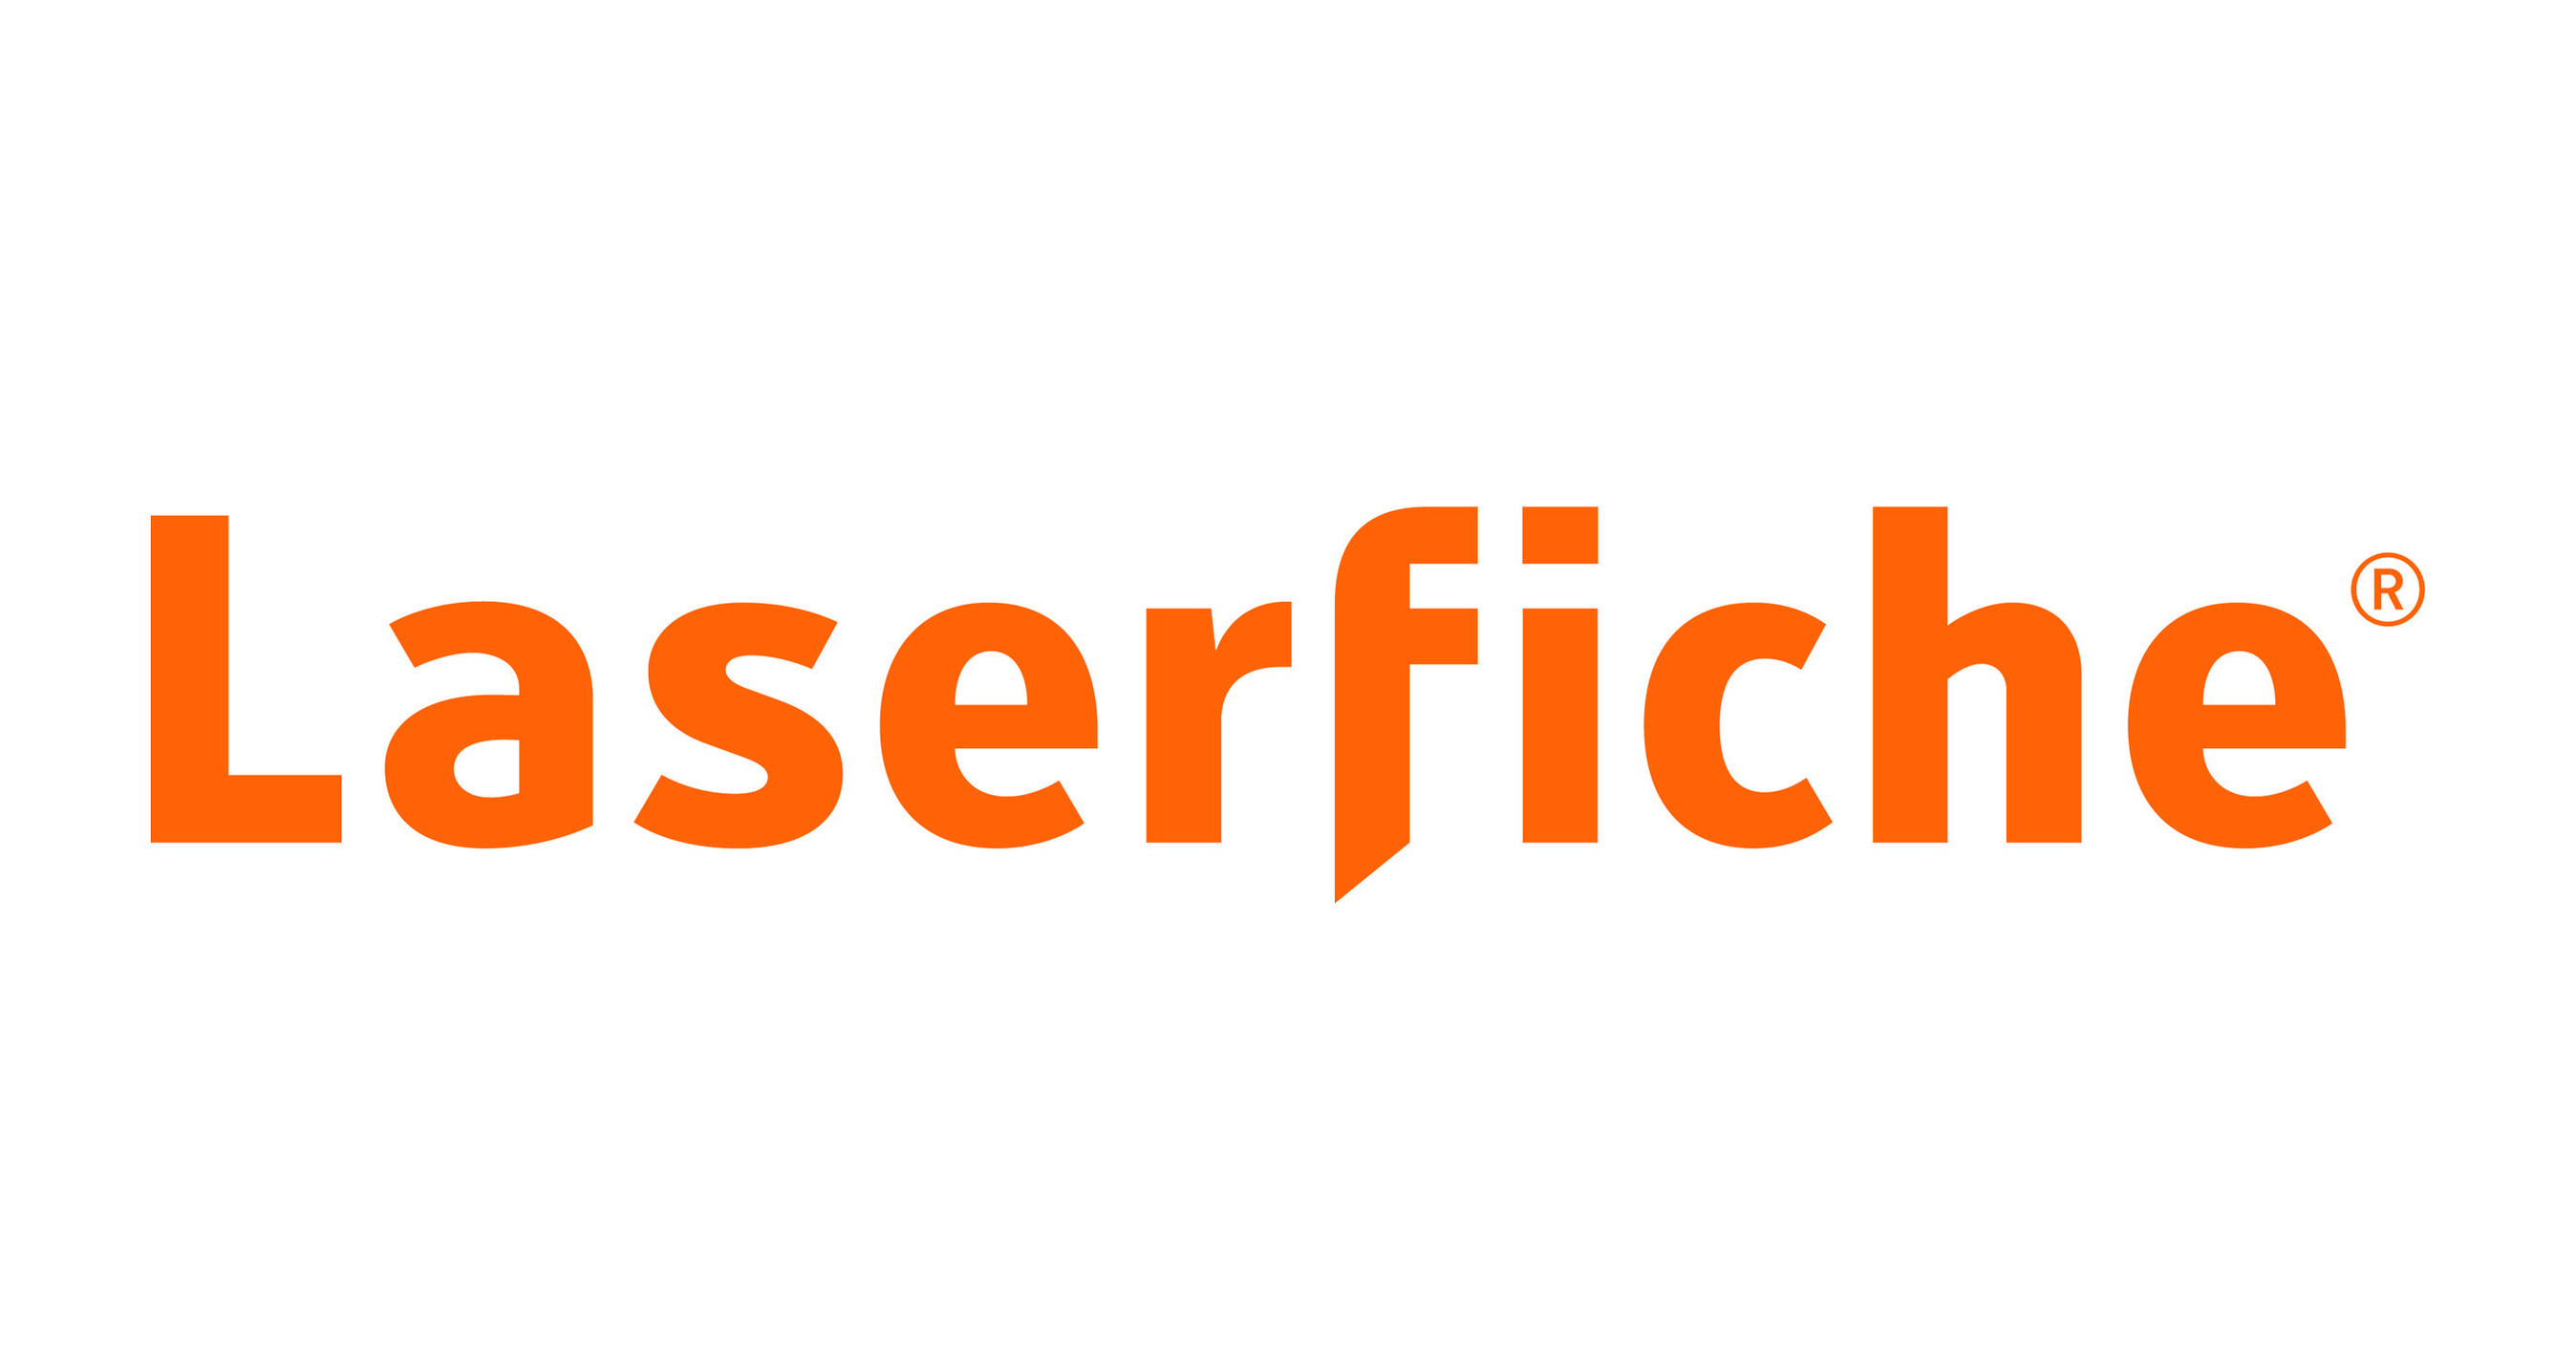 Laserfiche Partners with Fujitsu Australia to Provide Enterprise Content  Management Software and Scanner Hardware Packages to Enable Digital  Workplaces During COVID-19